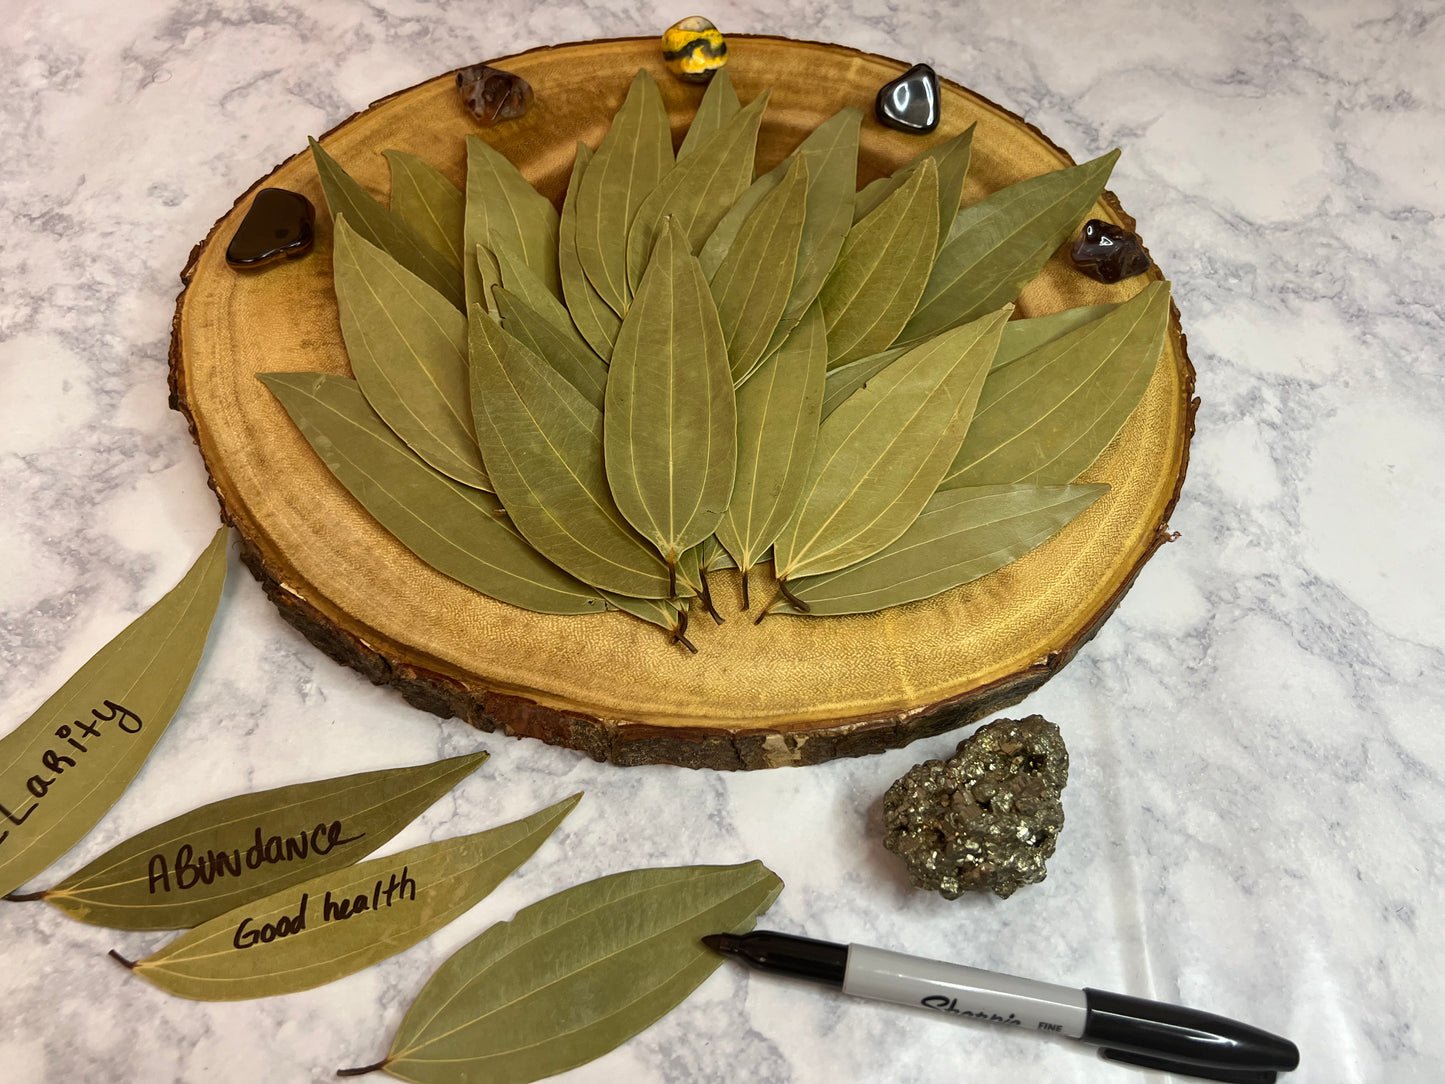 Bay leaves for manifesting, protecting, and healing 